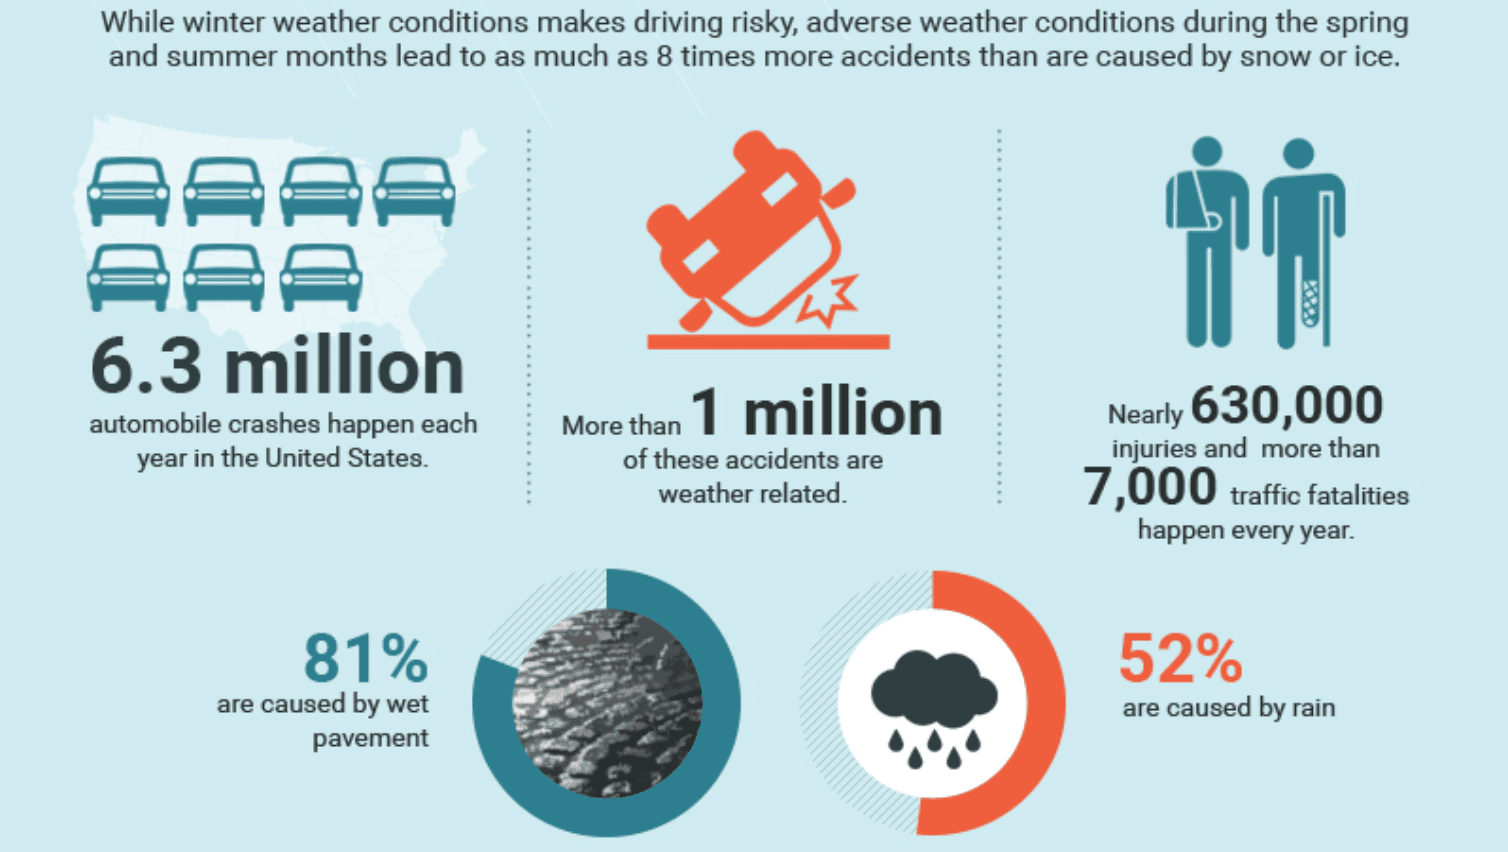 Aspects of Weather Related Traffic Accidents